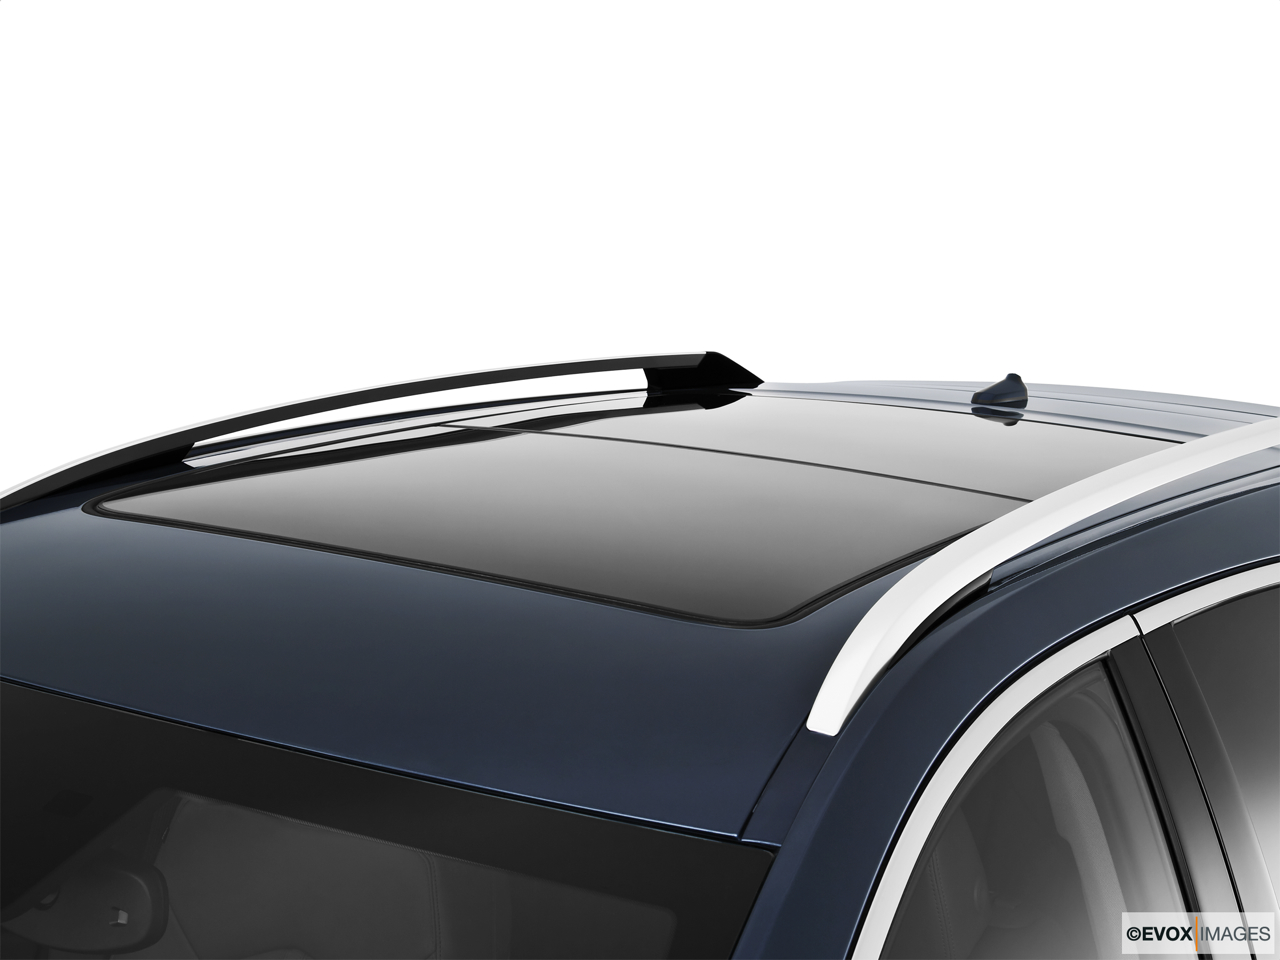 2010 Cadillac SRX Crossover Premium Collection Sunroof/moonroof. 